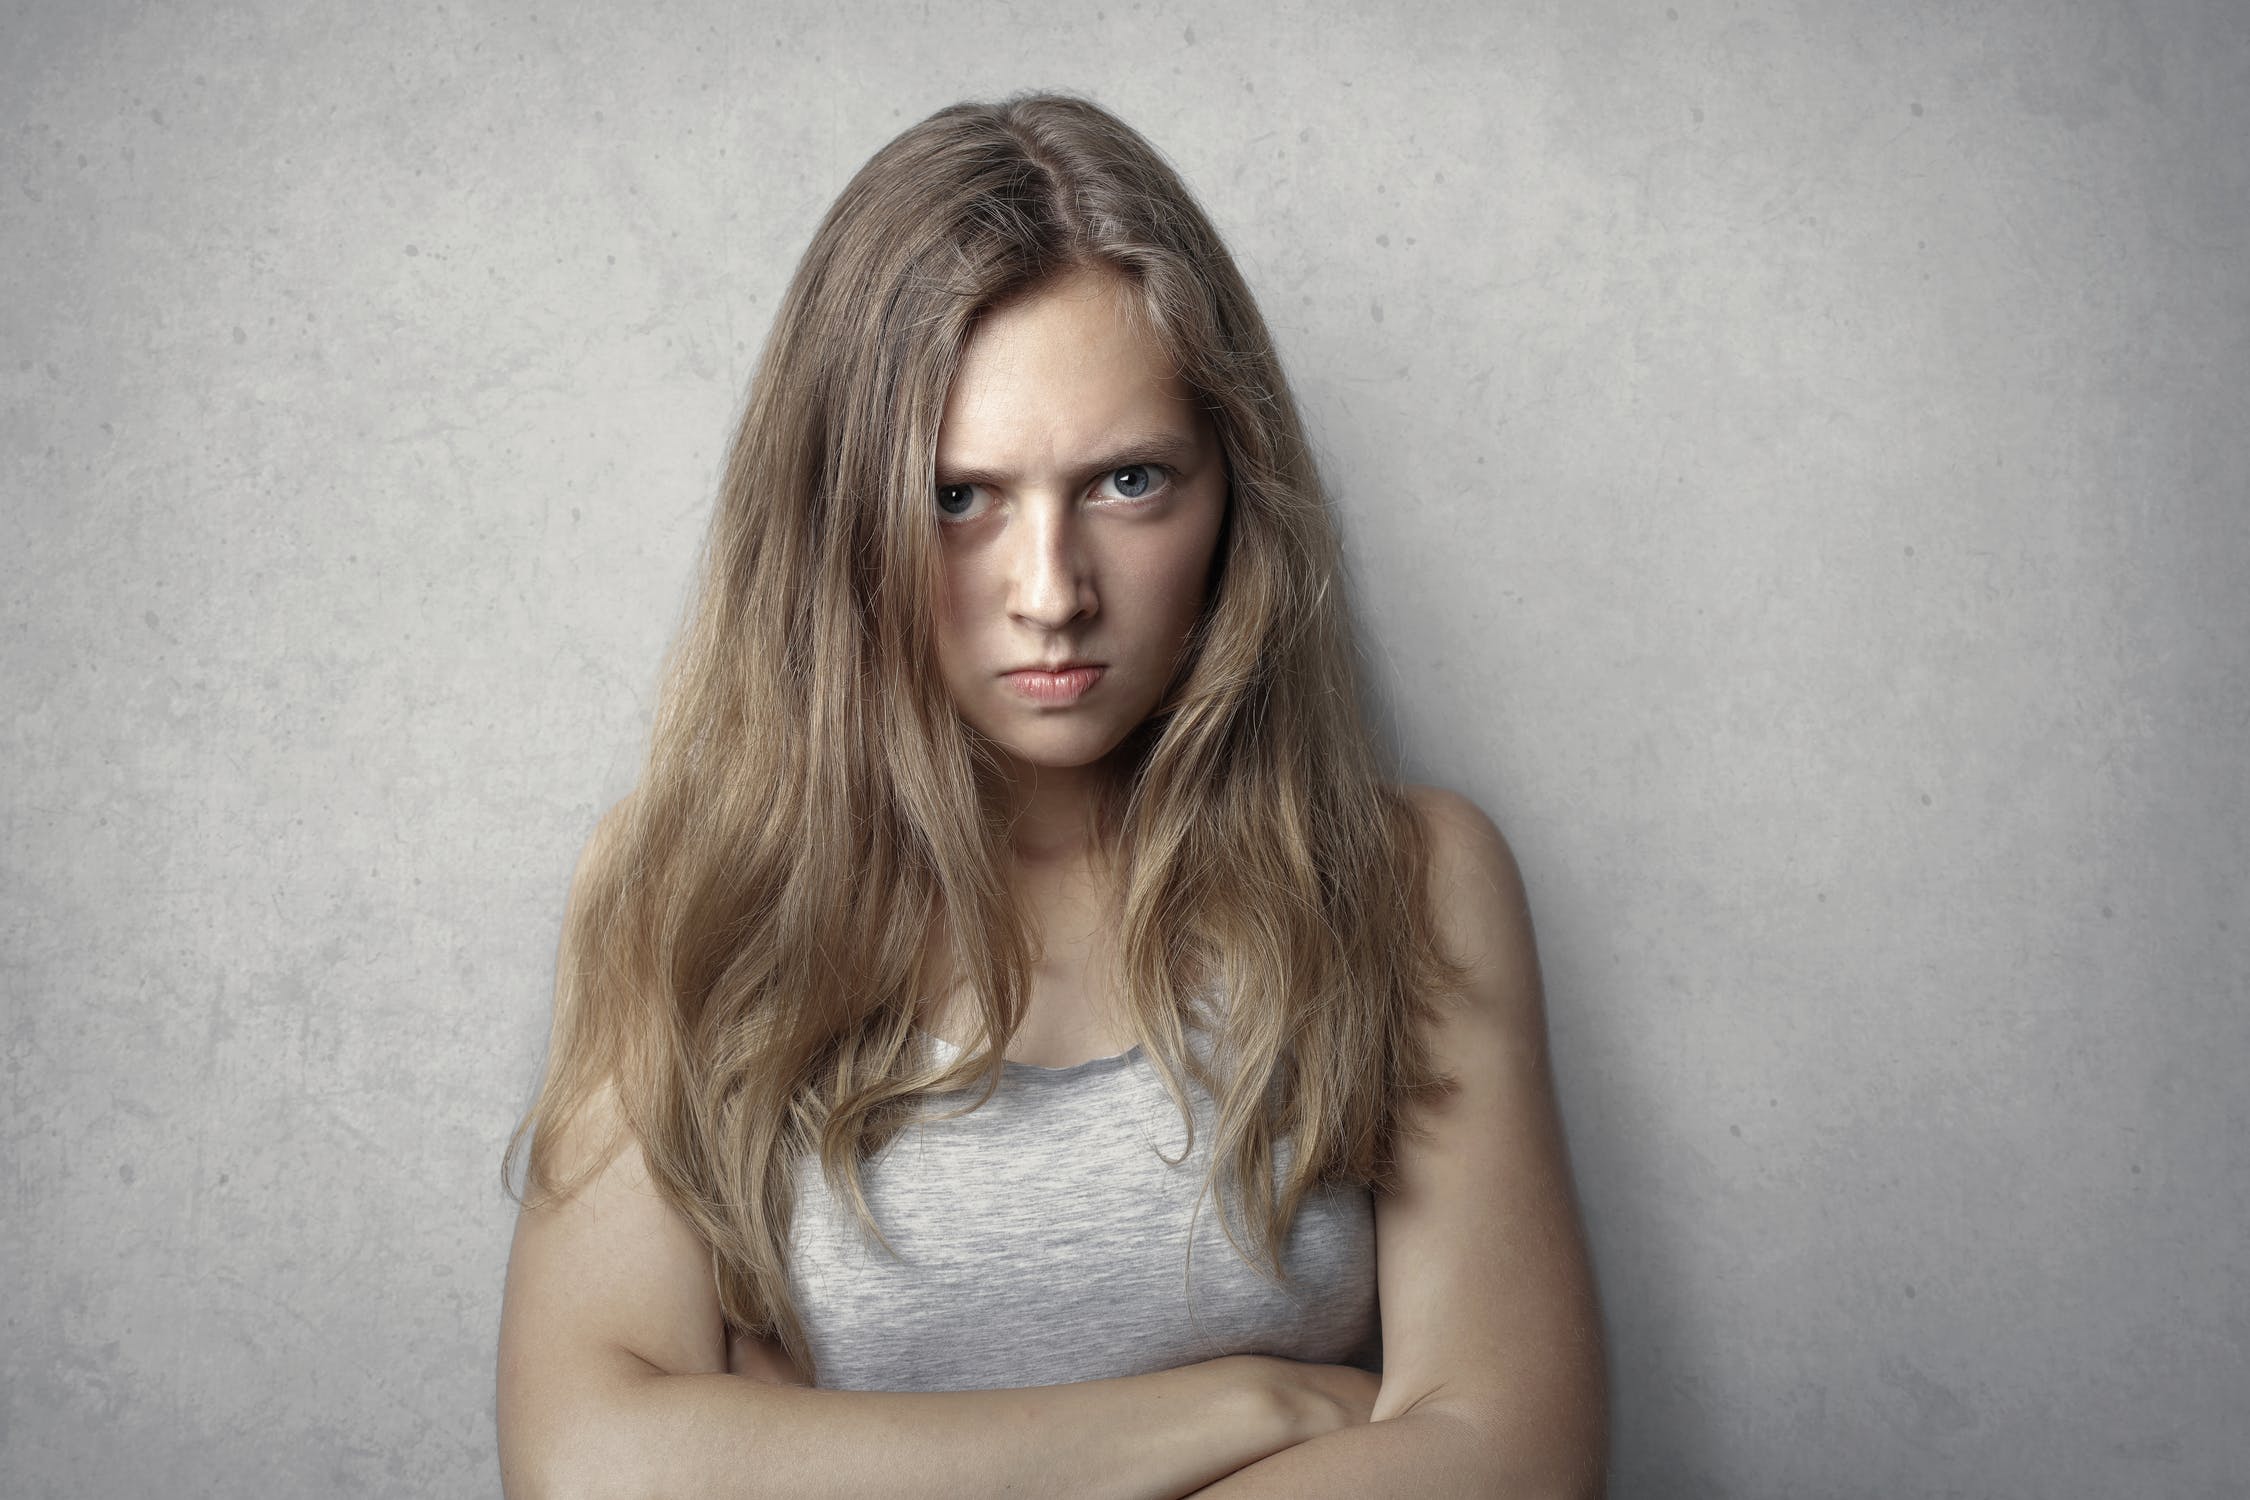 An angry daughter | Source: Pexels